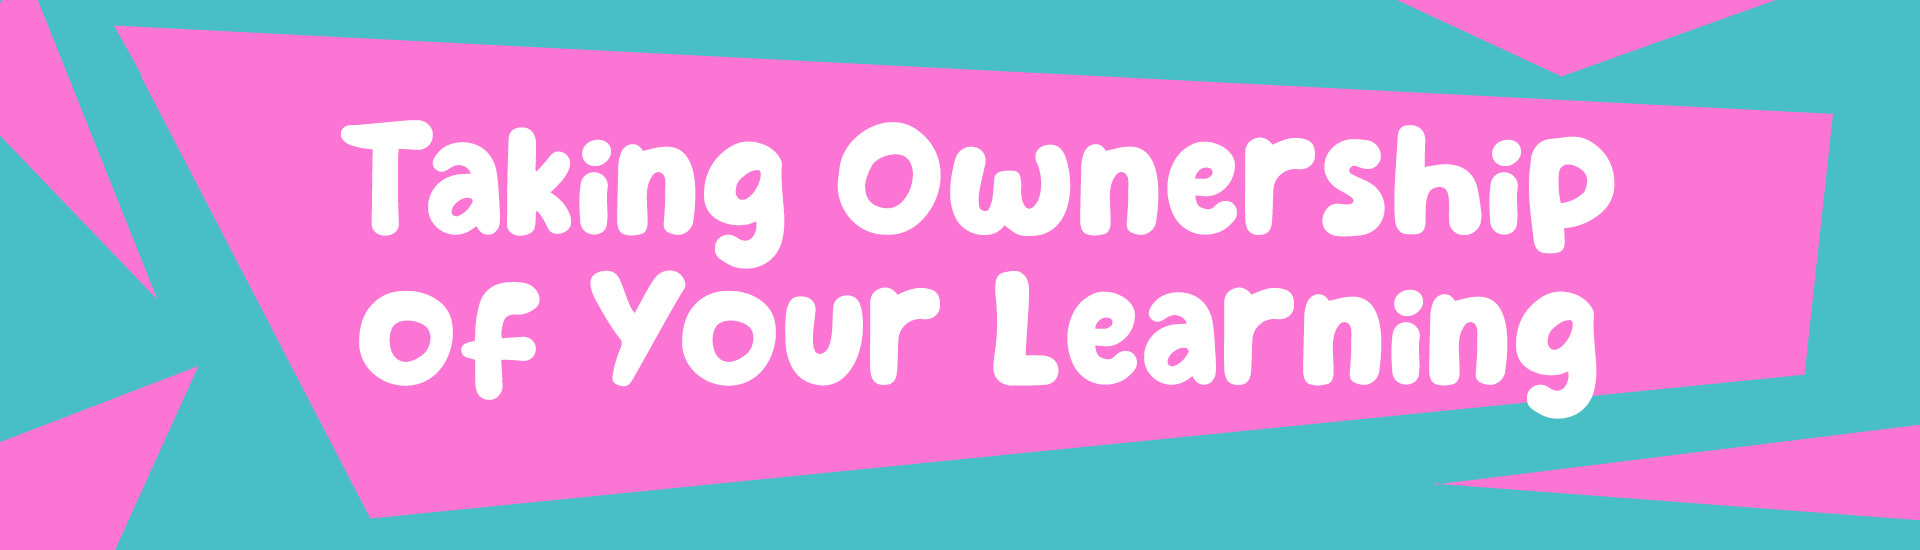 Taking Ownership of Your Learning